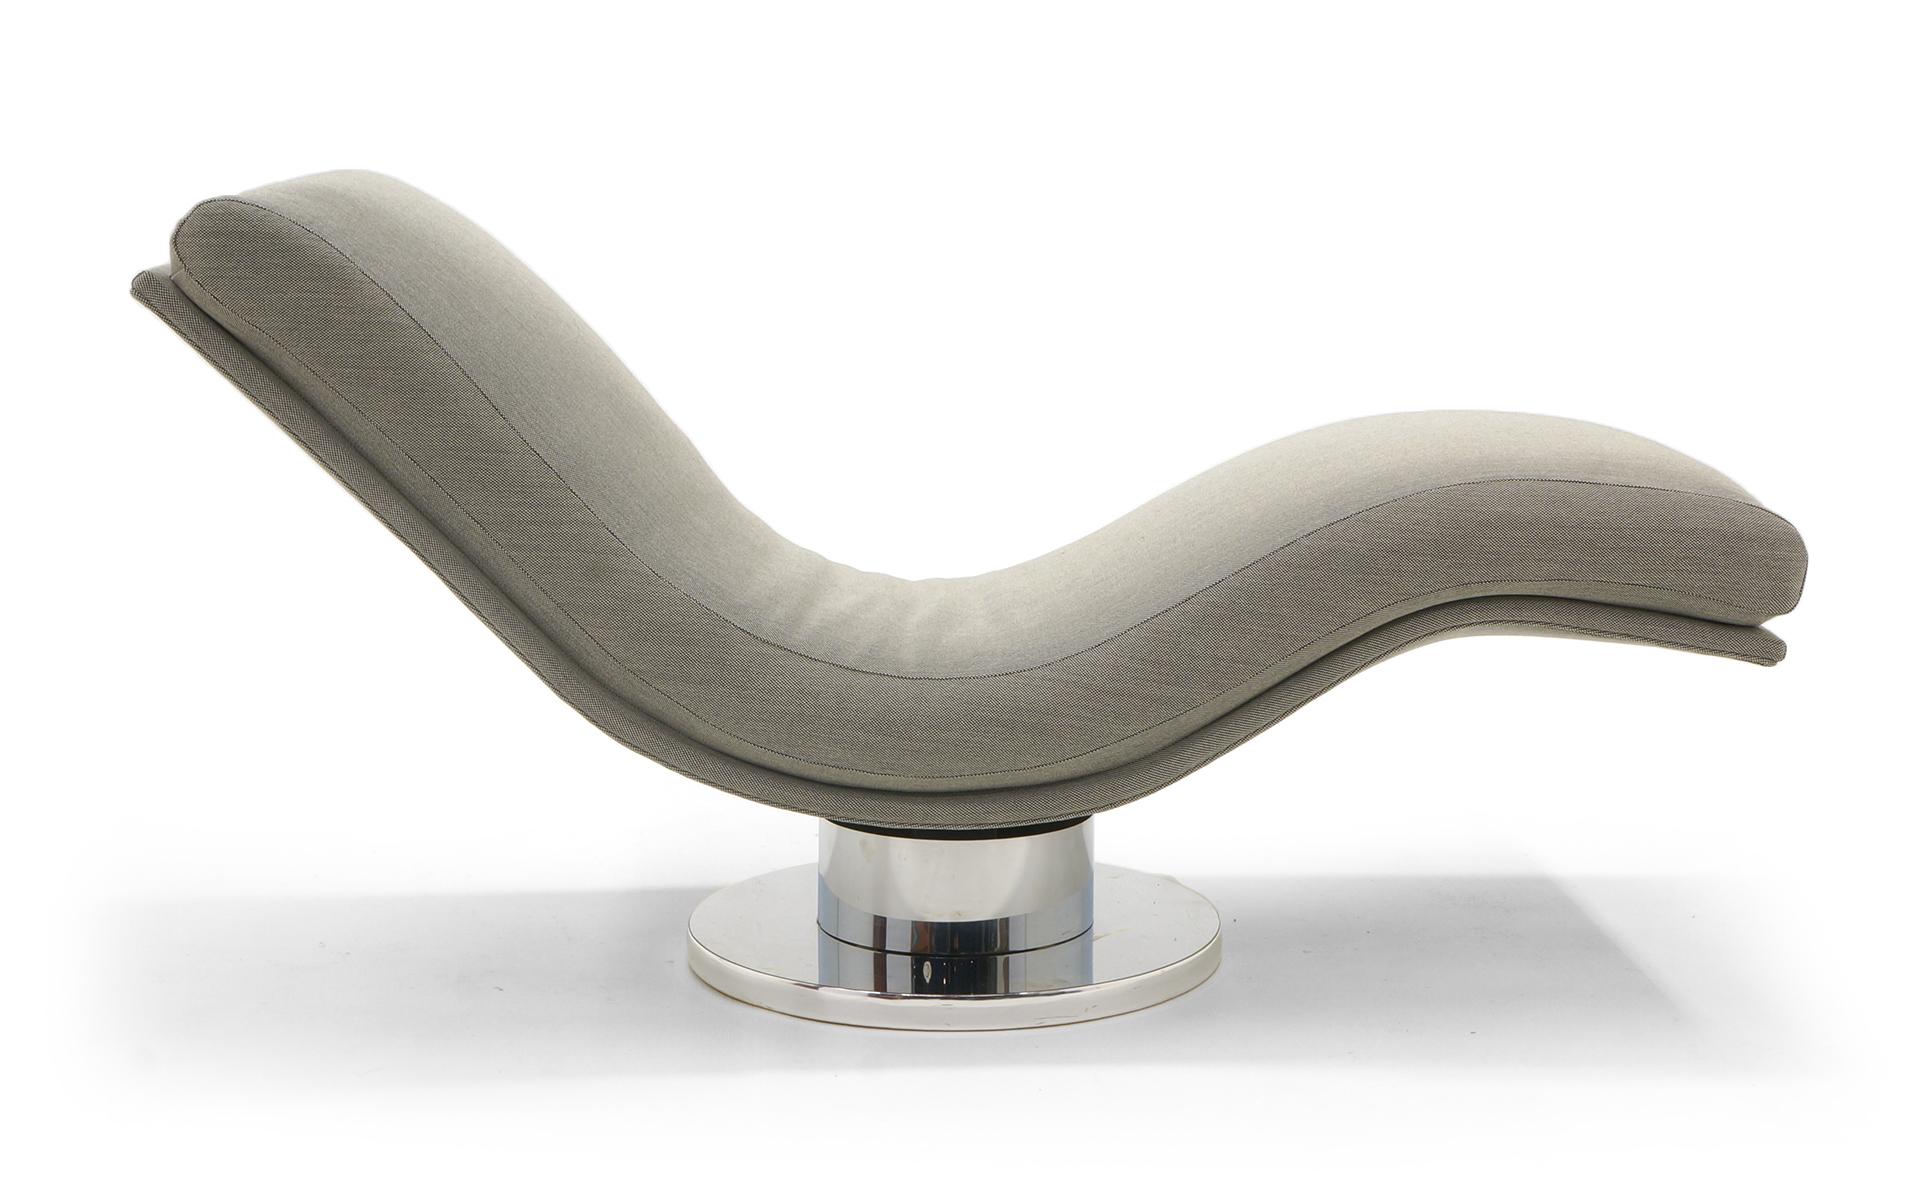 Milo Baughman for Thayer Coggin wave chaise. Expertly restored and reupholstered in Maharam light gray / grey steel cut trio fabric. So beautiful and comfortable.